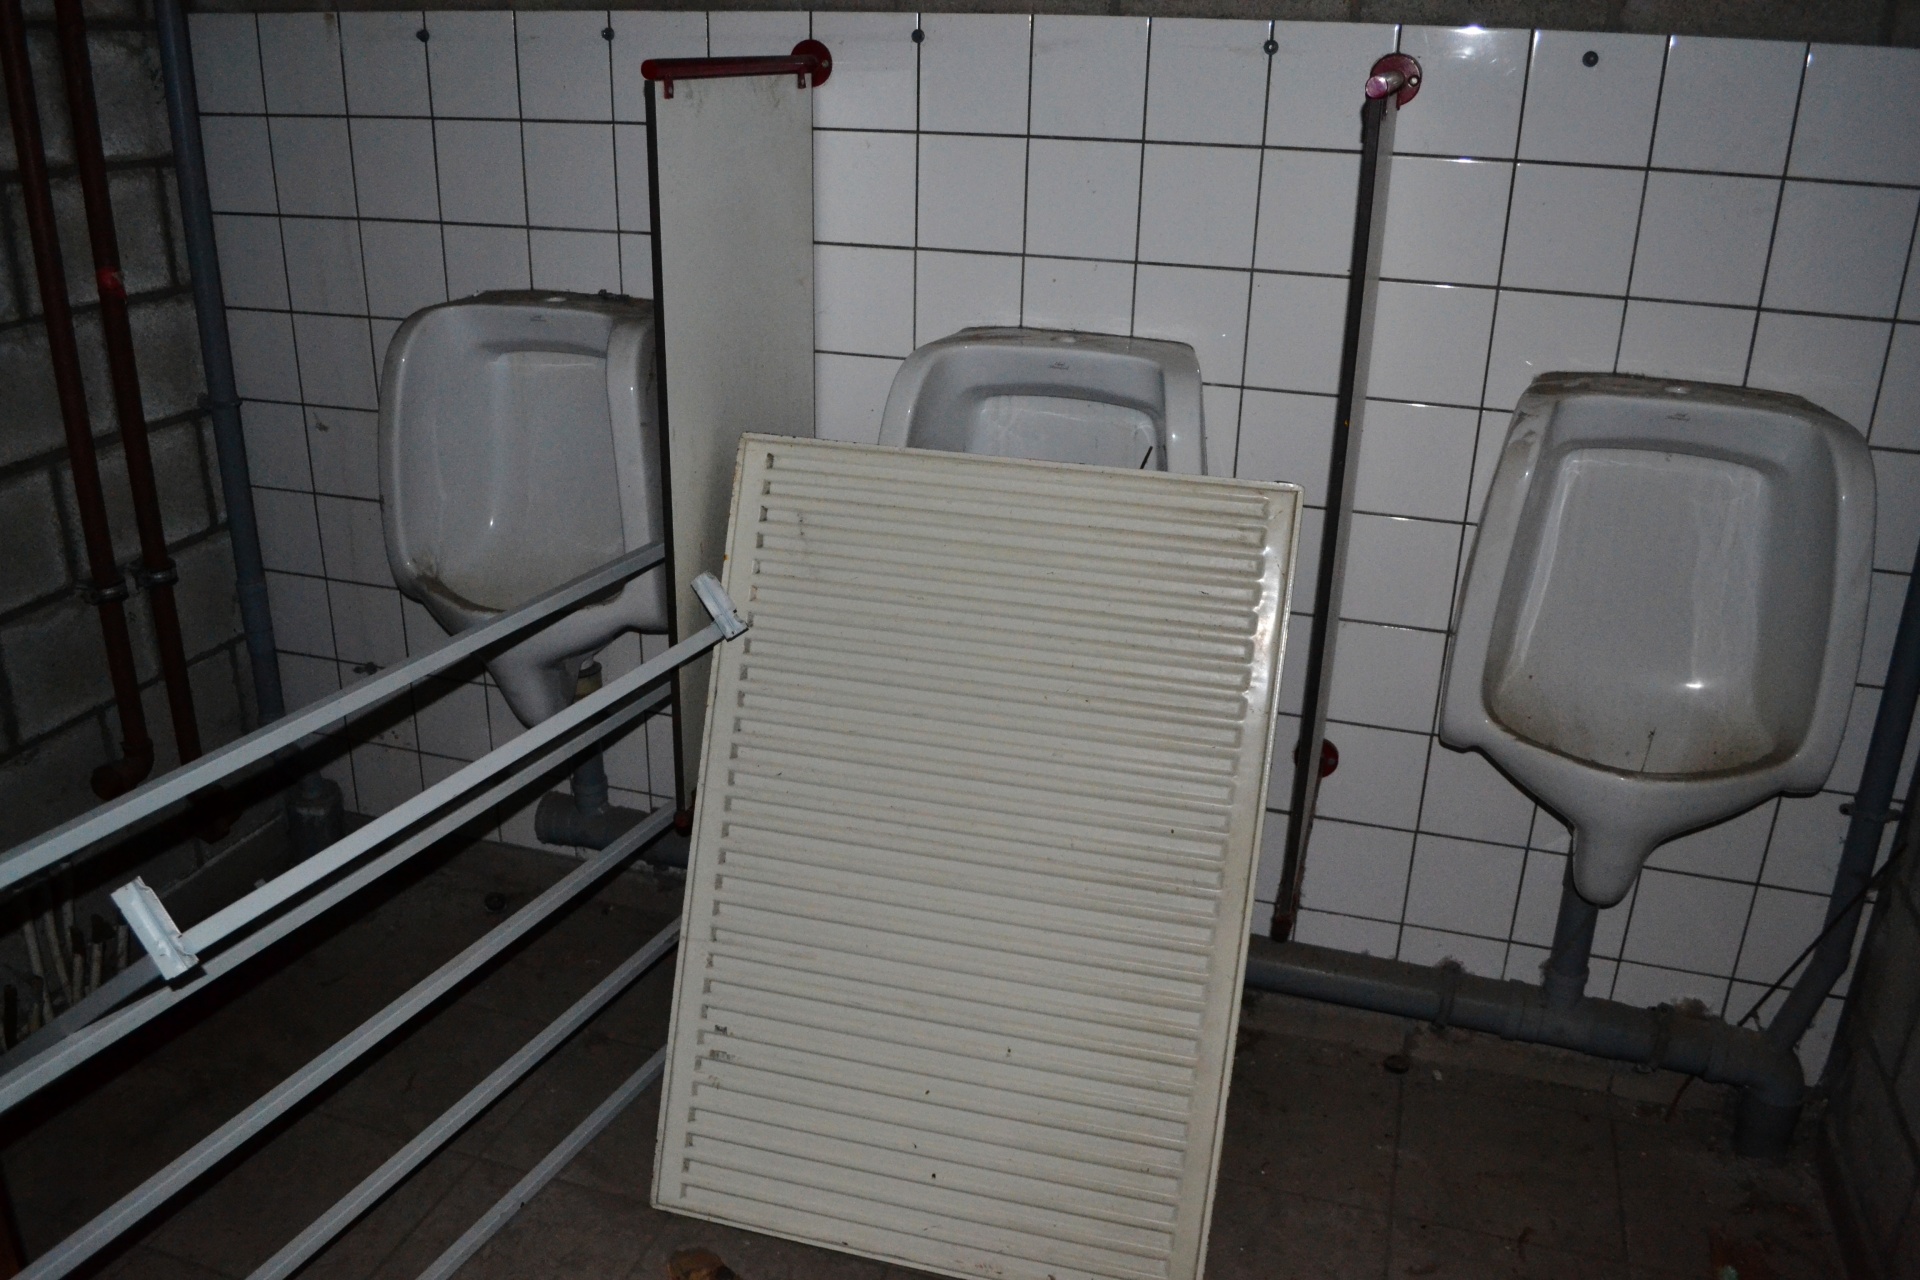 Abandoned restroom in factory with radiator